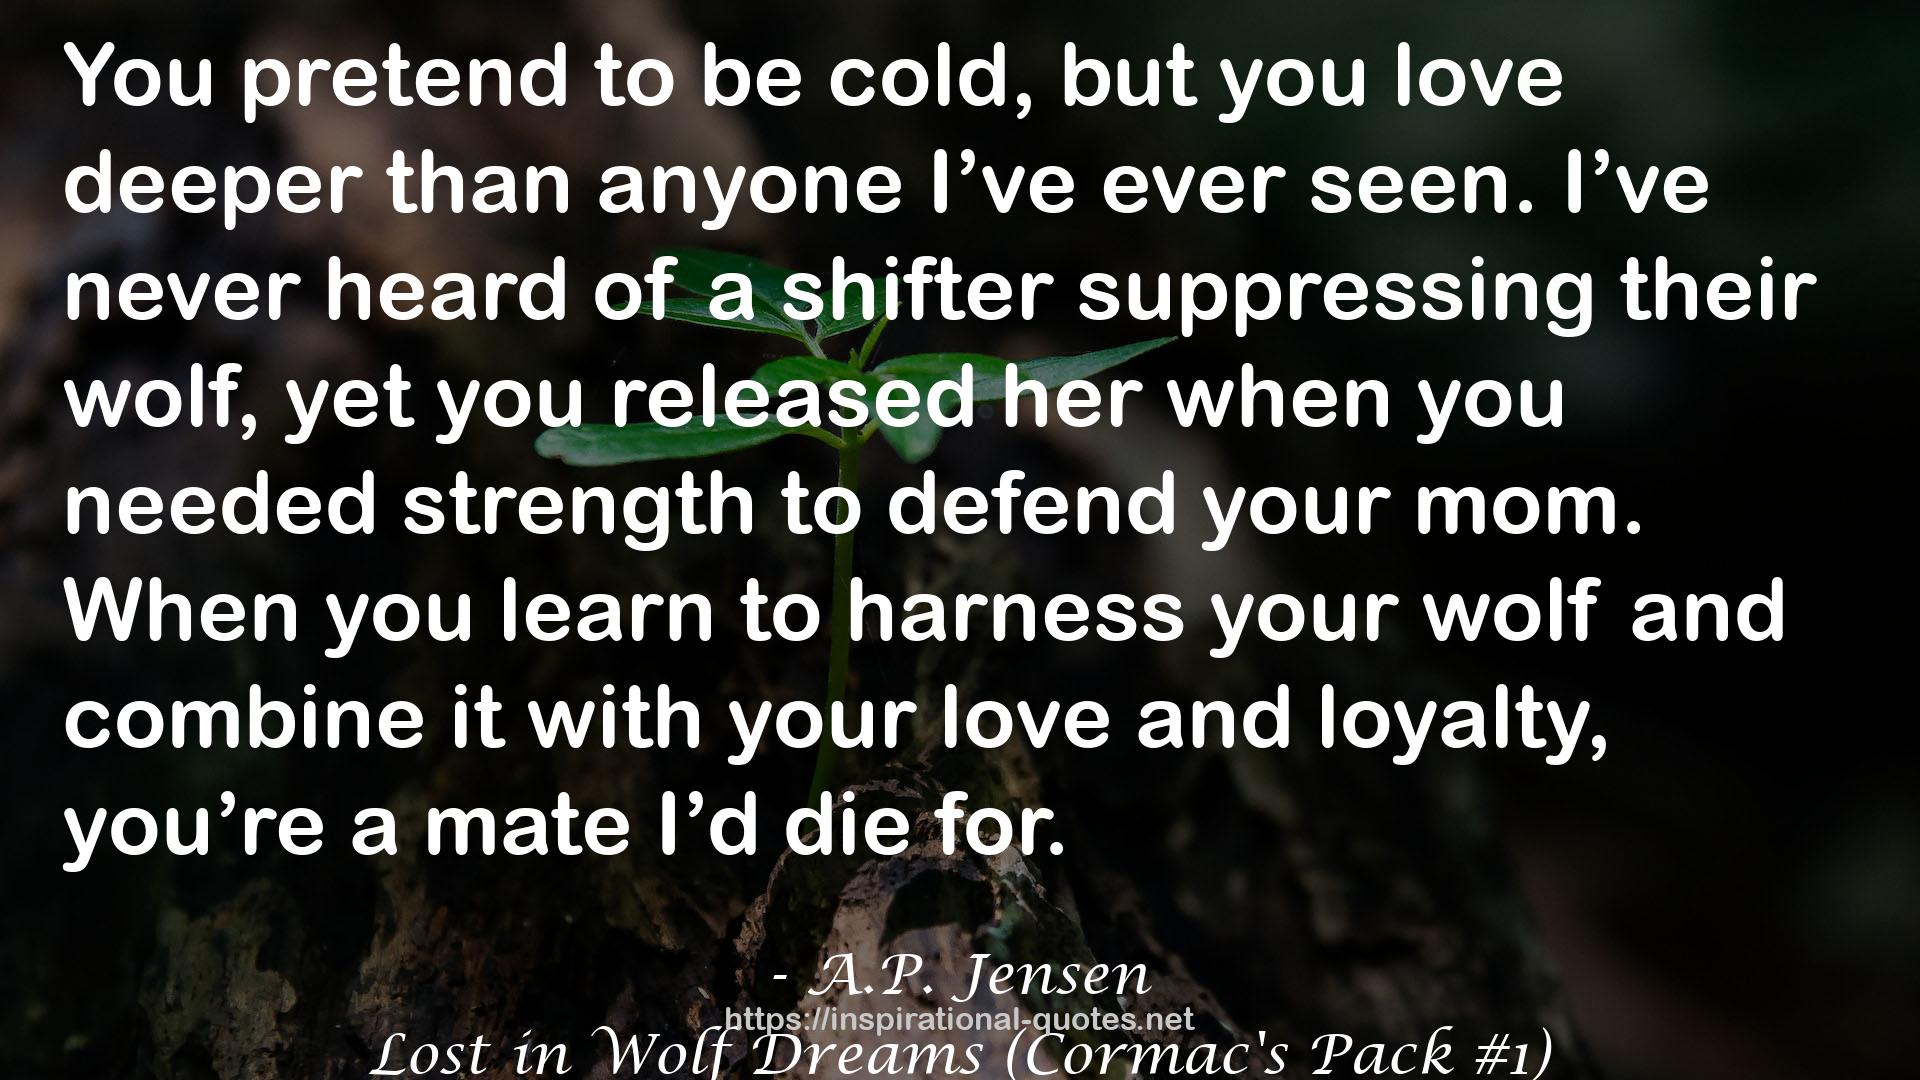 Lost in Wolf Dreams (Cormac's Pack #1) QUOTES